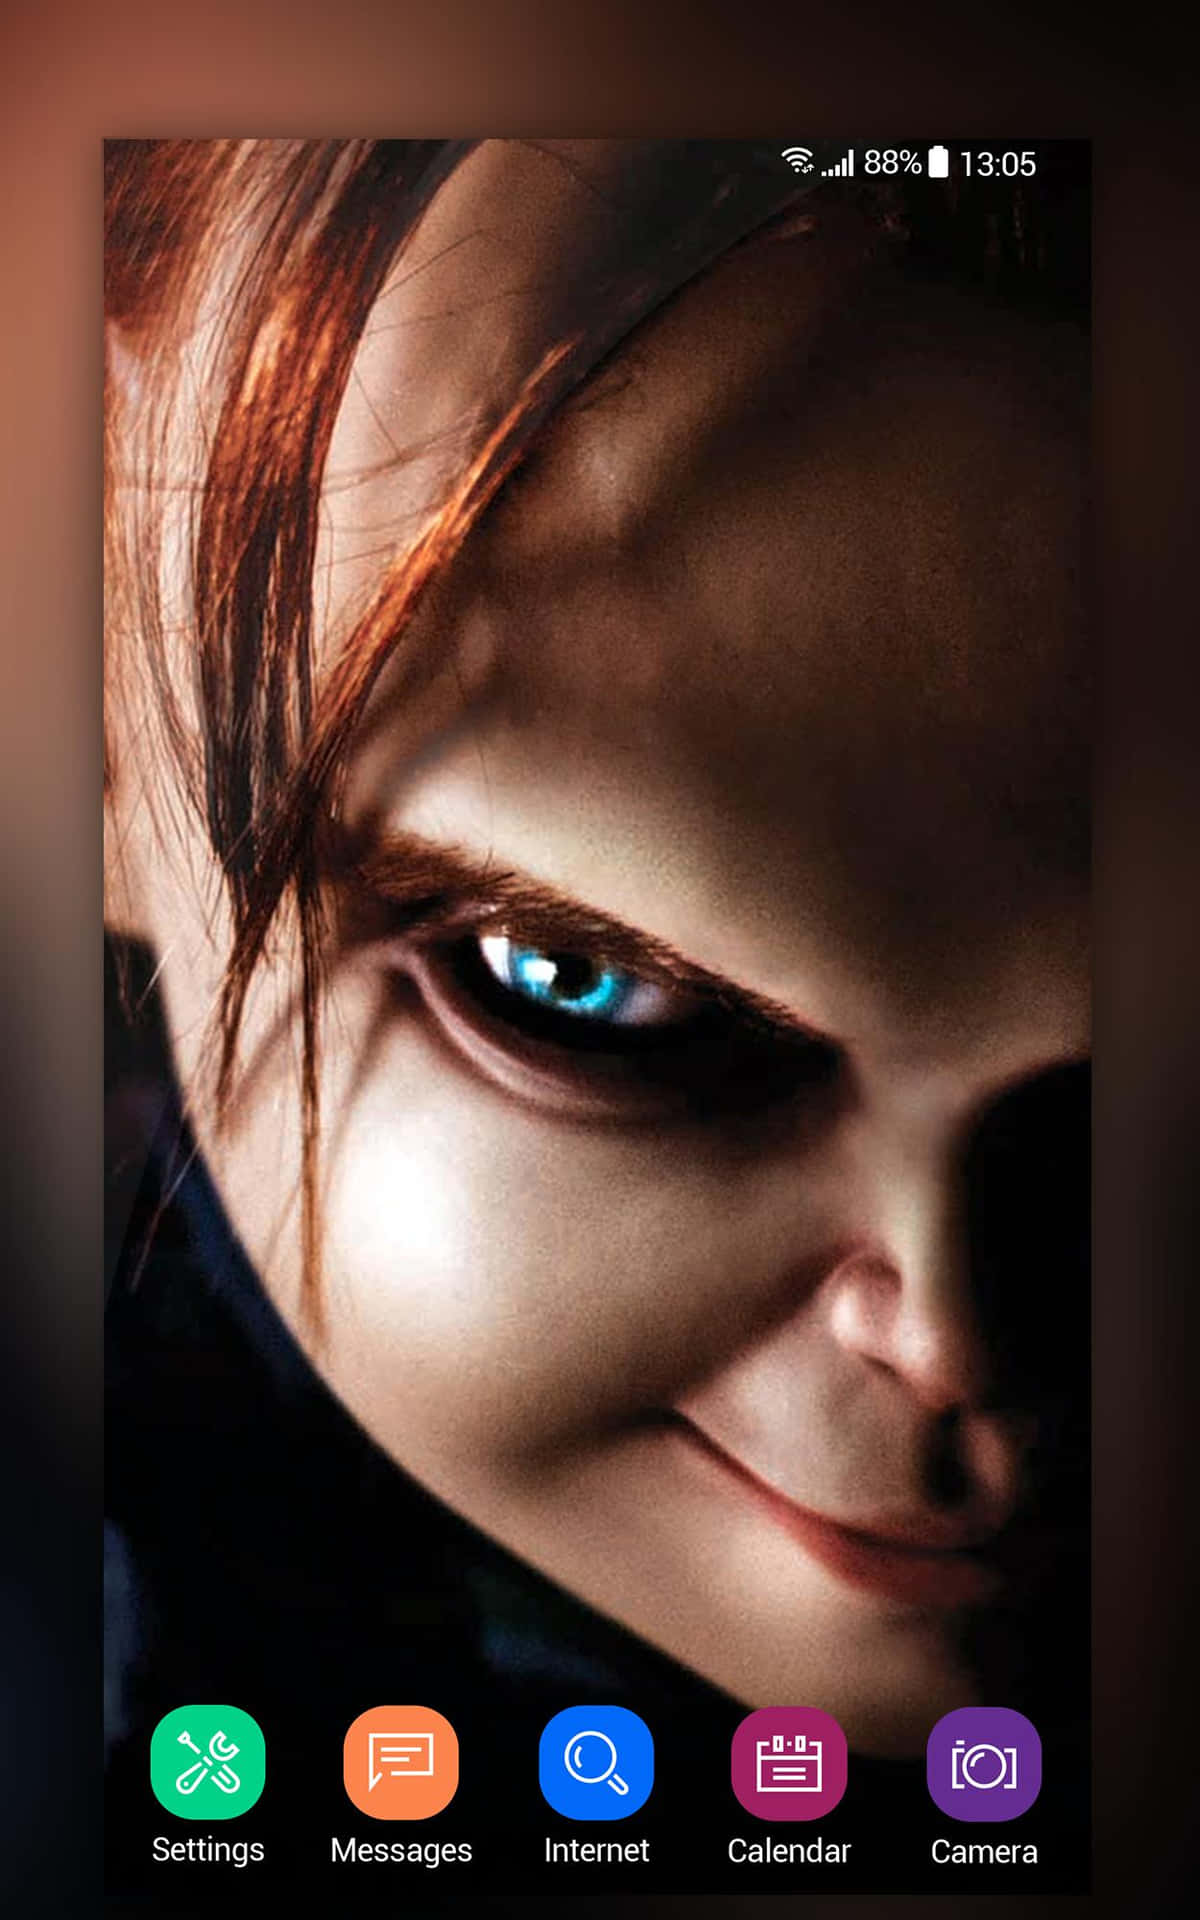 "This Chucky Doll Is Ready To Play!" Wallpaper